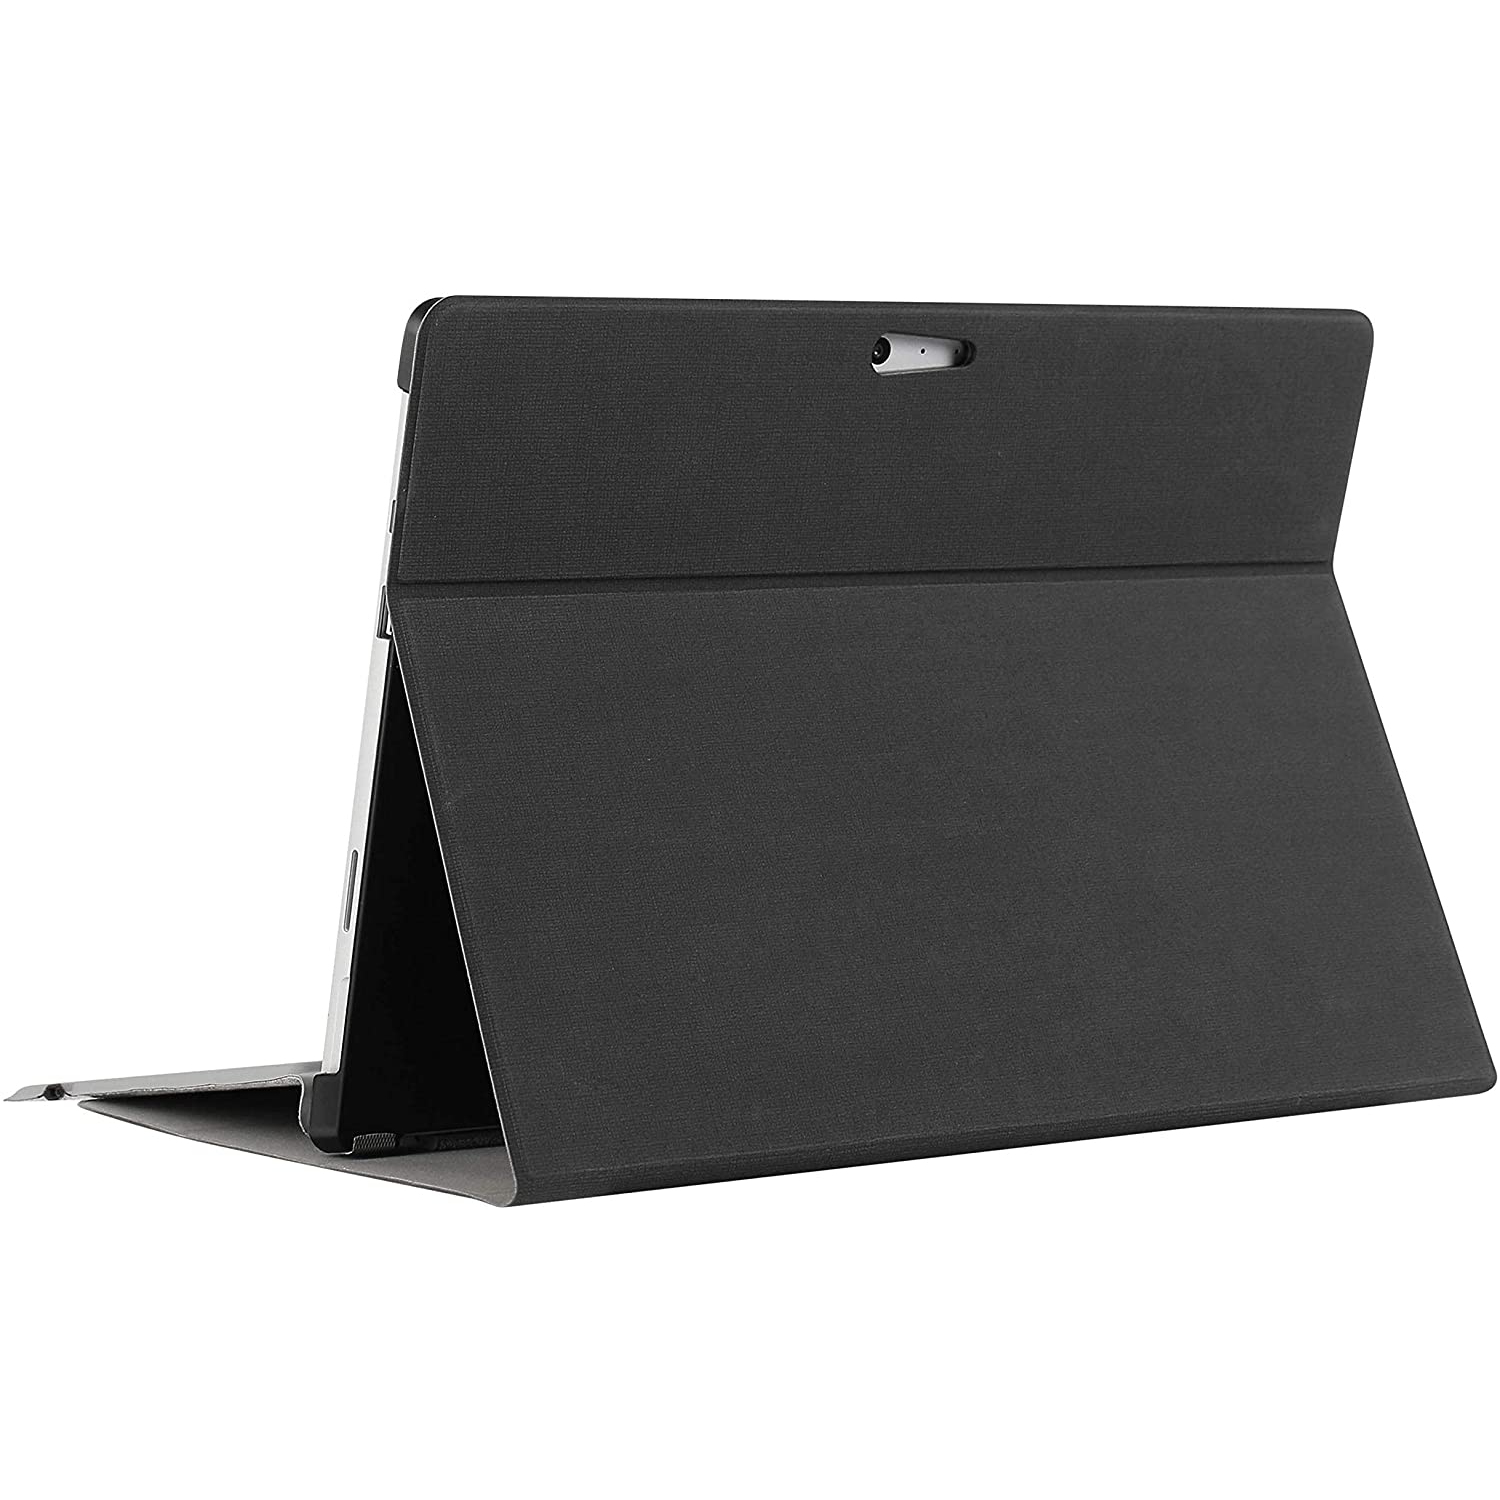 New Surface Pro Protective Case Kit + [Tempered Glass Screen Protector], Folio Stand/Shock